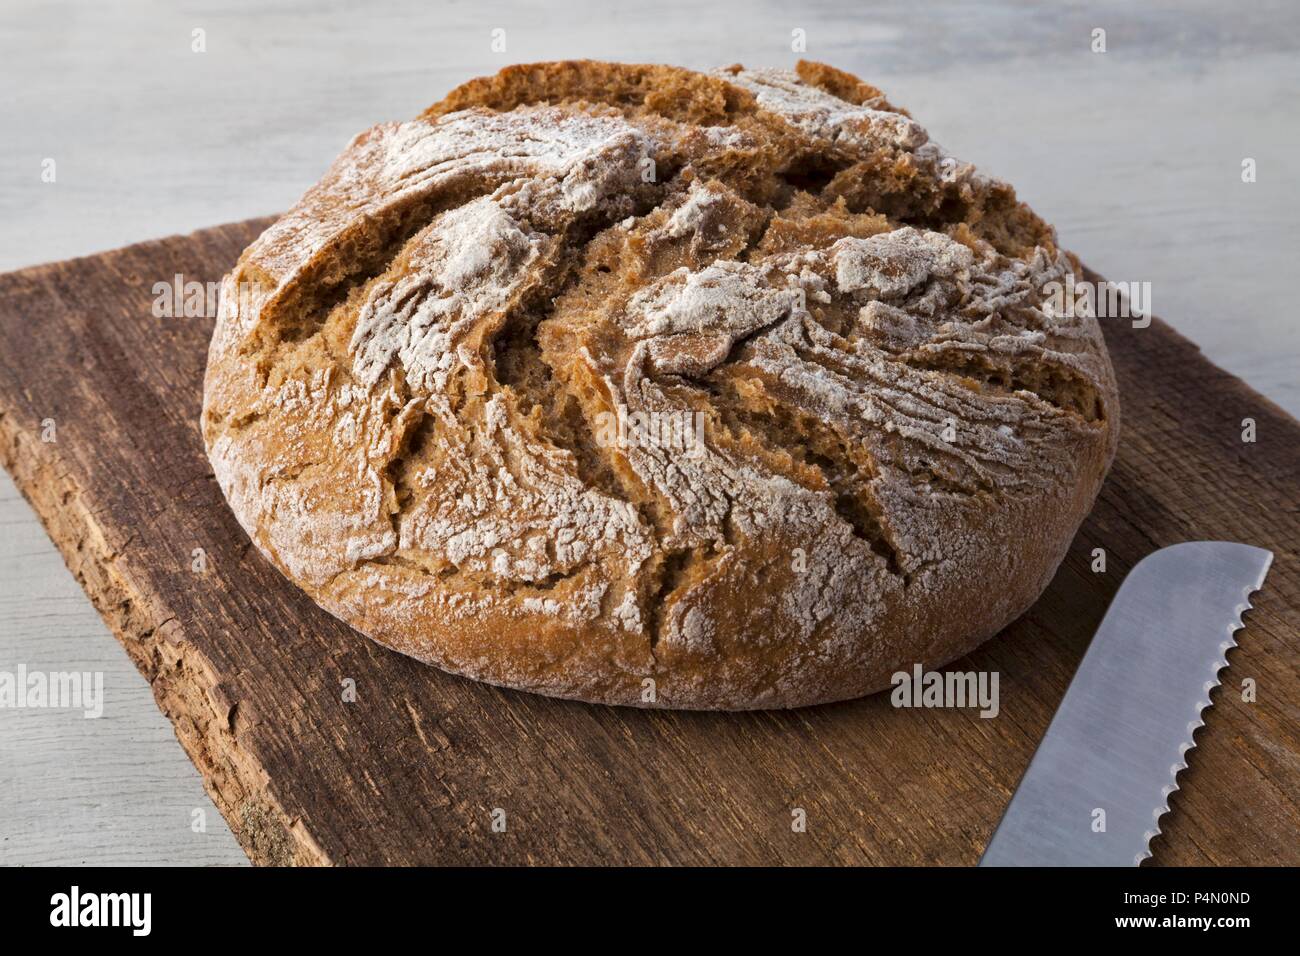 Country bread on a wooden board with a bread knife Stock Photo